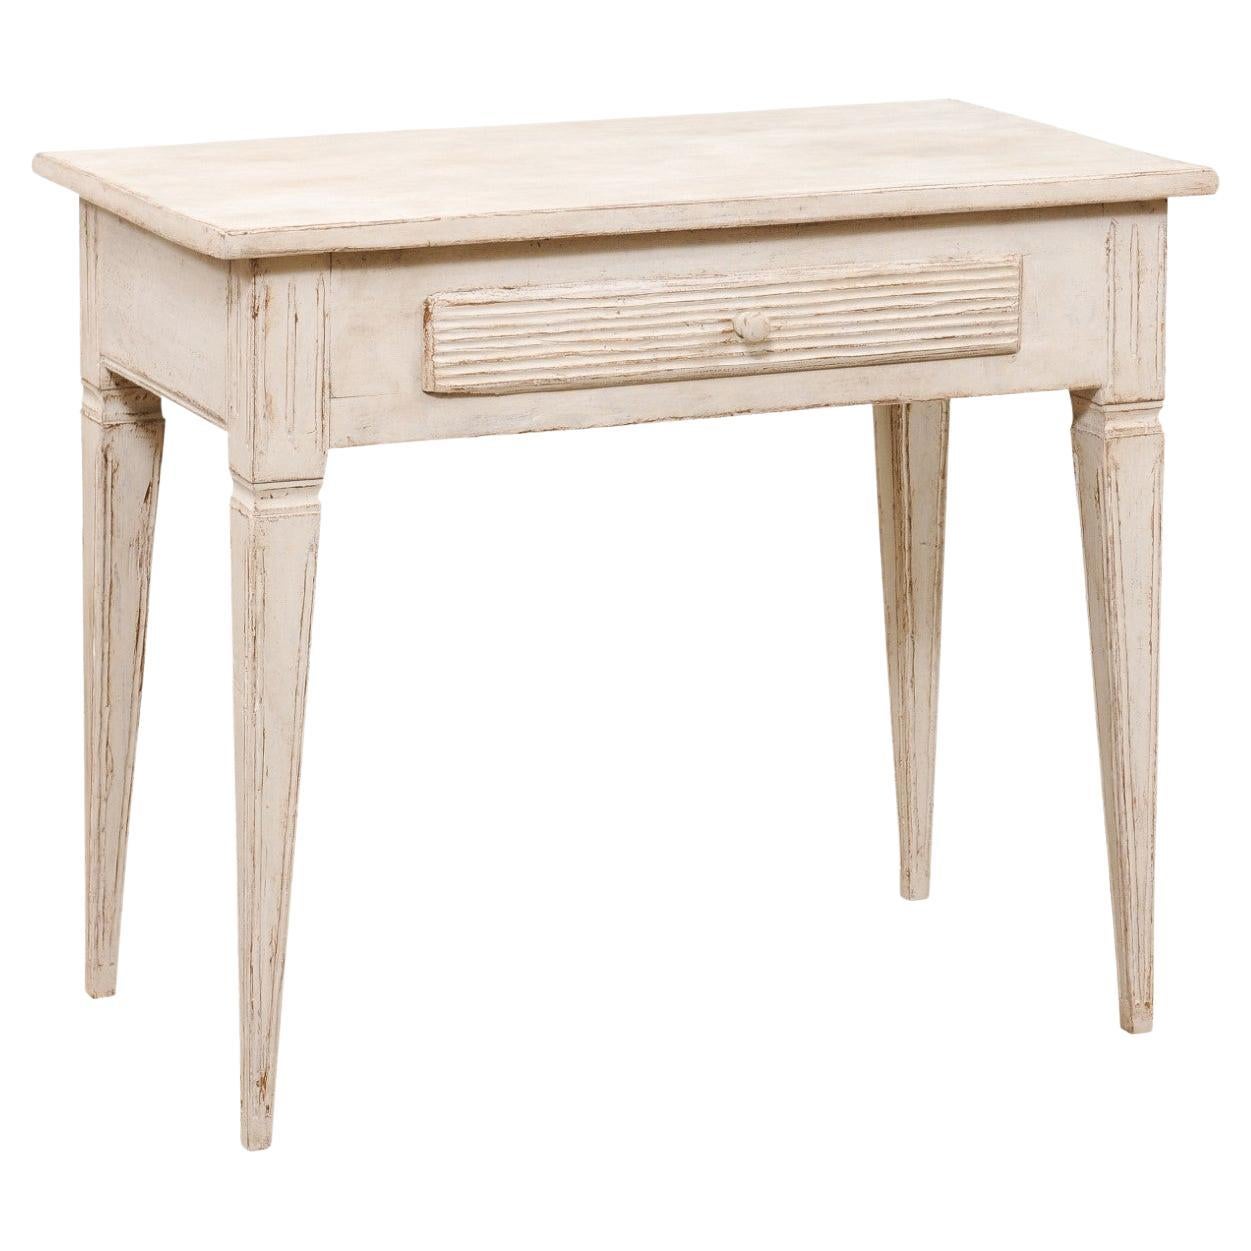 Swedish Gustavian Style Painted Side Table with Reeded Drawer and Tapered Legs For Sale